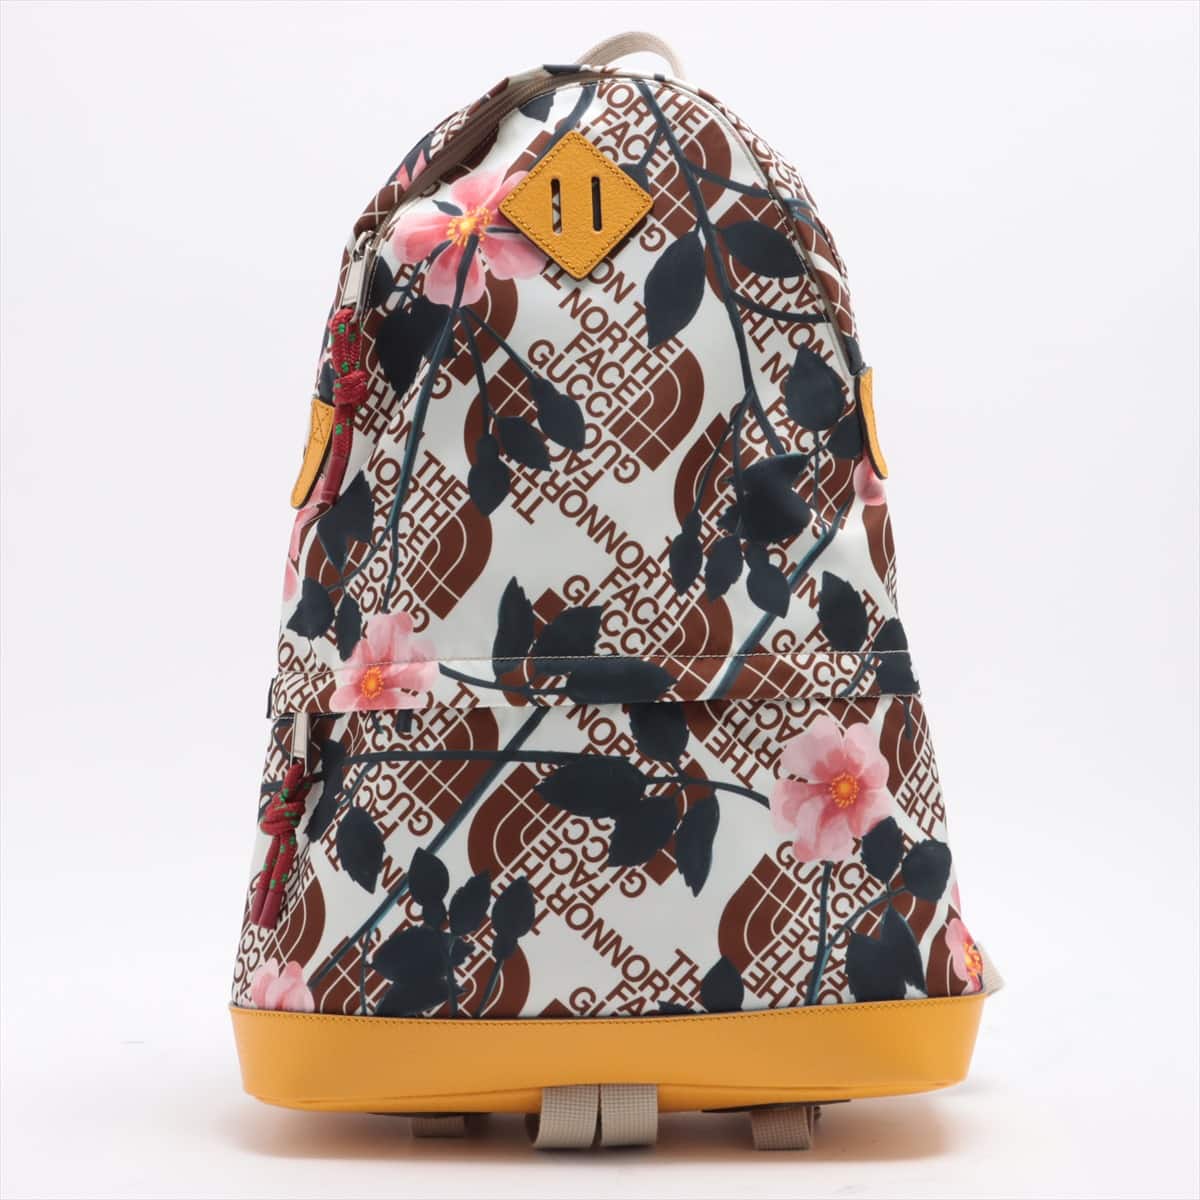 Gucci x North Face Nylon & Leather Backpack Multicolor 650288